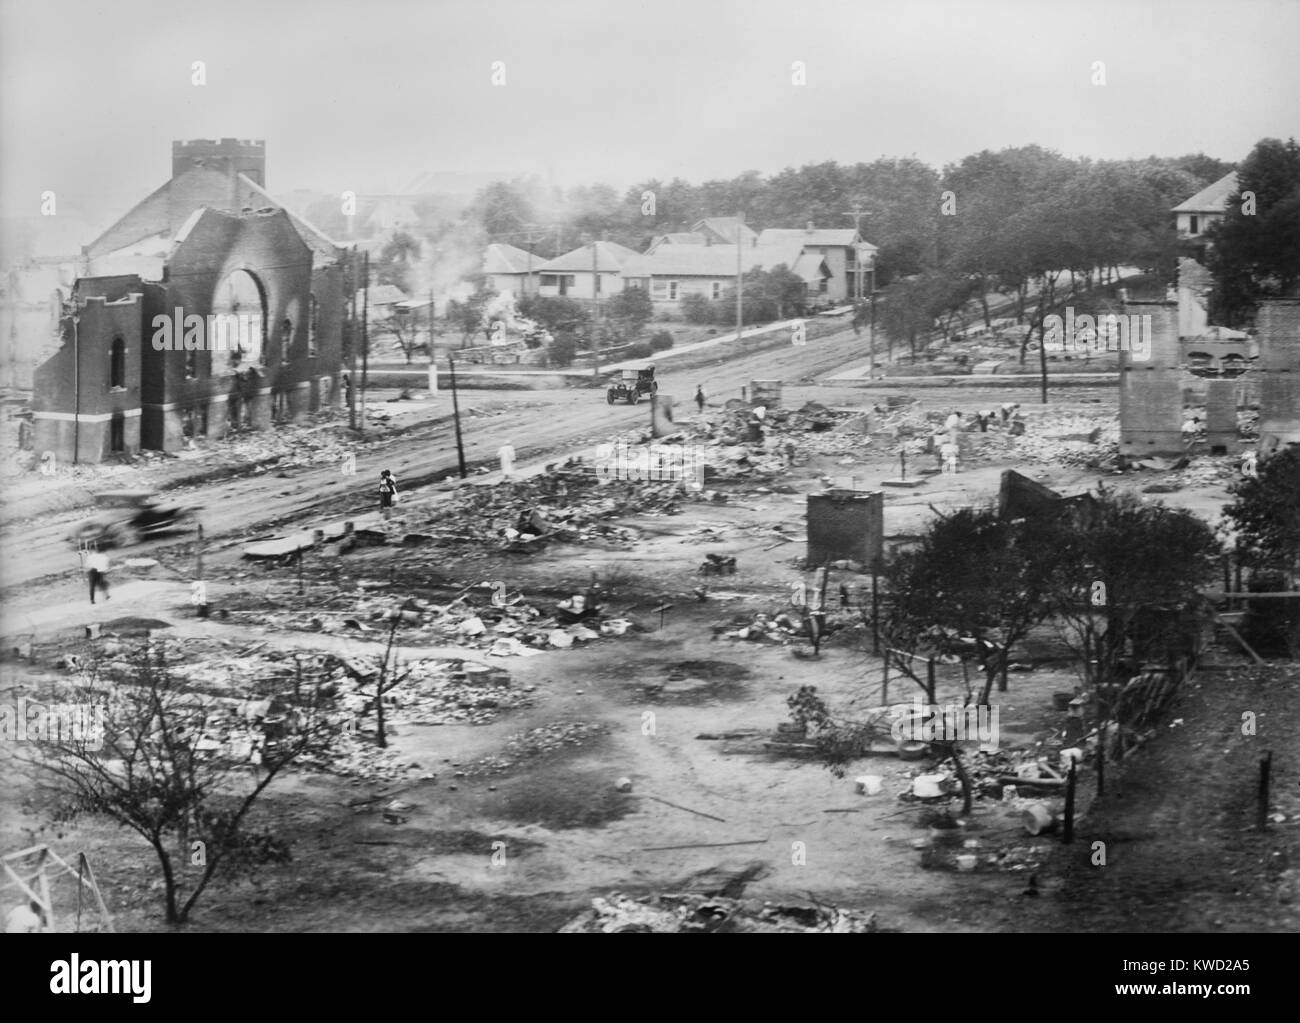 Part of district burned in 1917 Tulsa race riots, including the ruins of Mt. Zion Baptist Church. Three people walk in through the devastation  (BSLOC_2017_20_80) Stock Photo